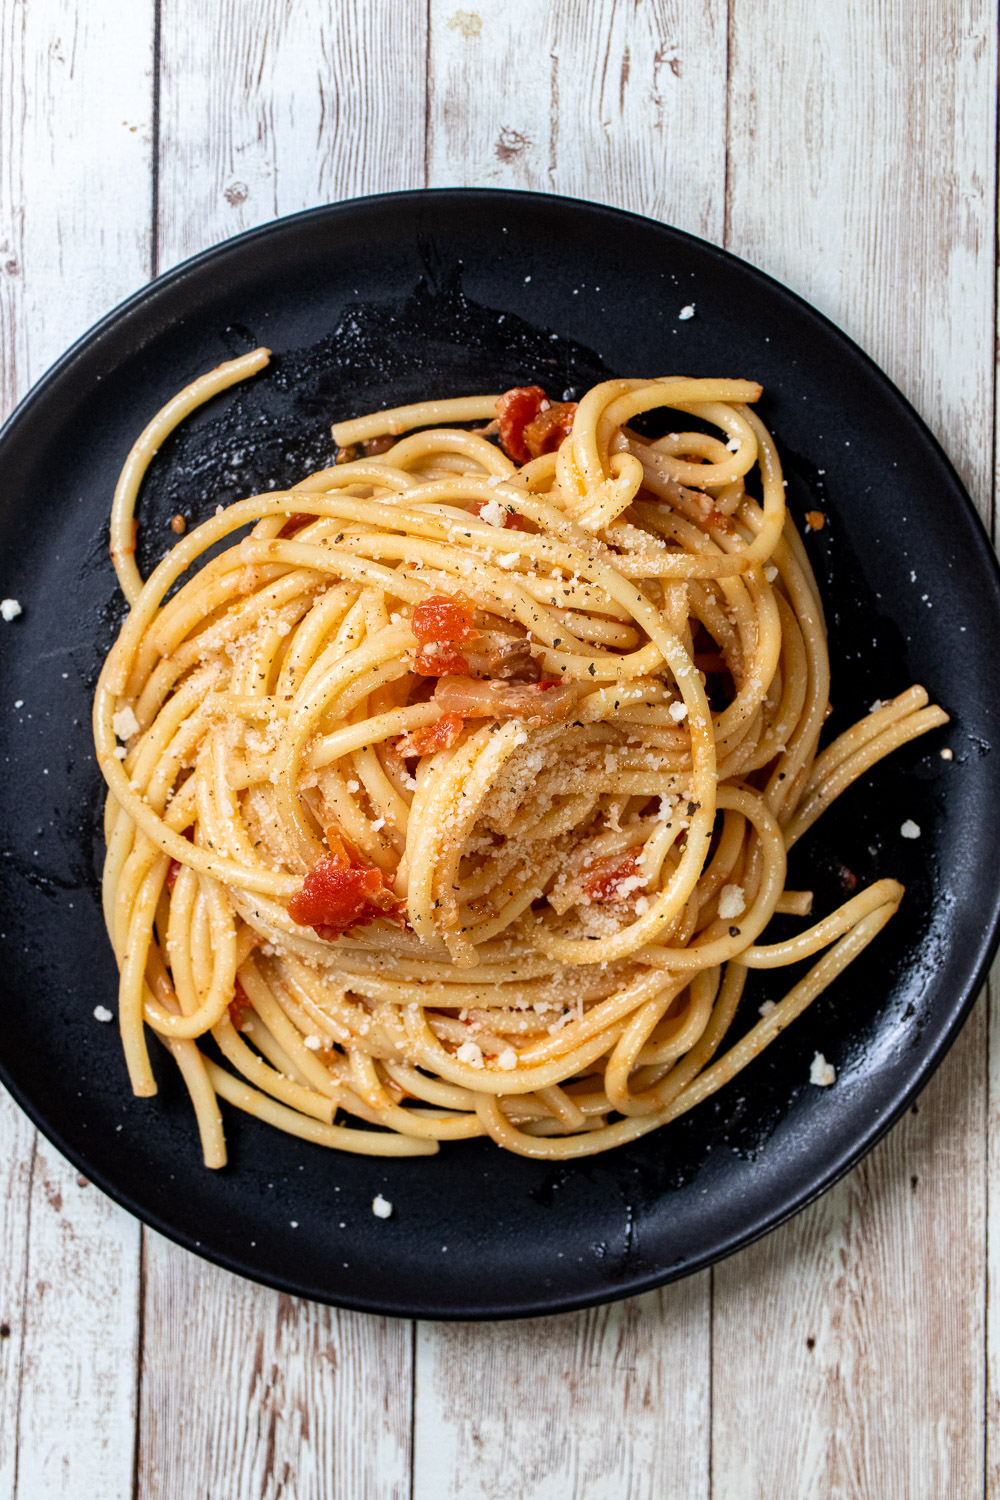 Authentic bucatini all'amatriciana served on a black plate.